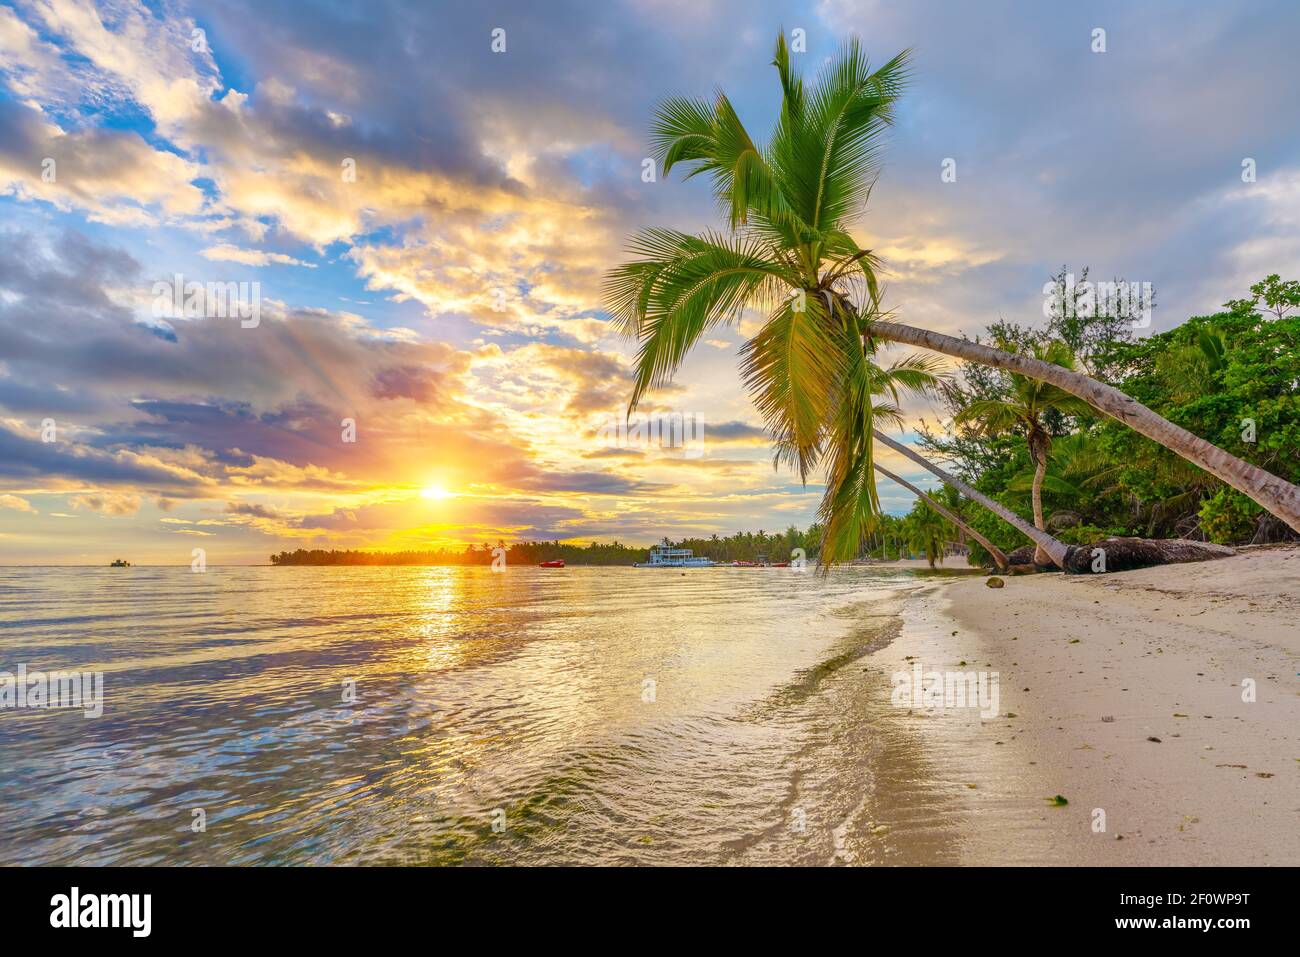 Beautiful sunrise over tropical beach and palm trees in Dominican republic Stock Photo